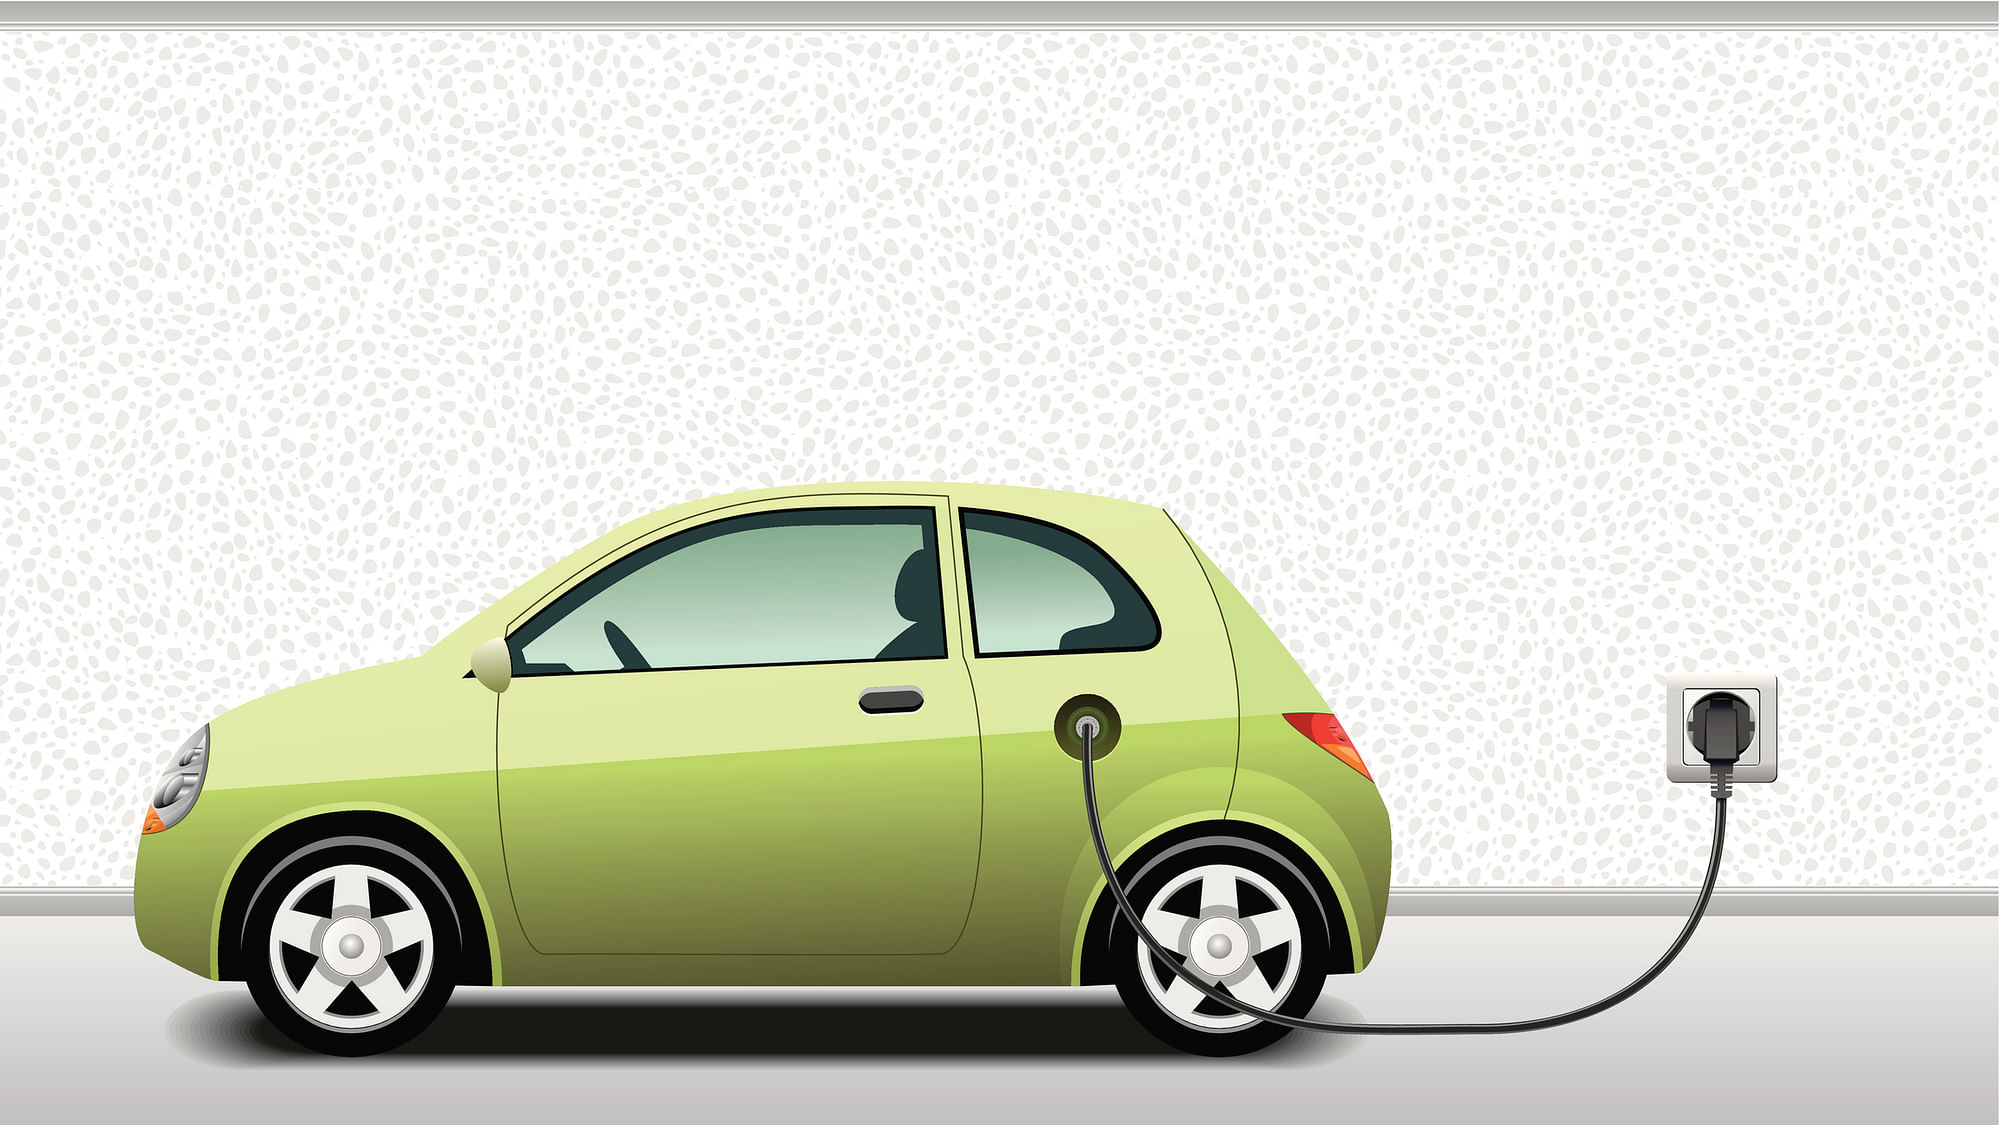 More than 7.2 lakh electric vehicles have been registered in Delhi.